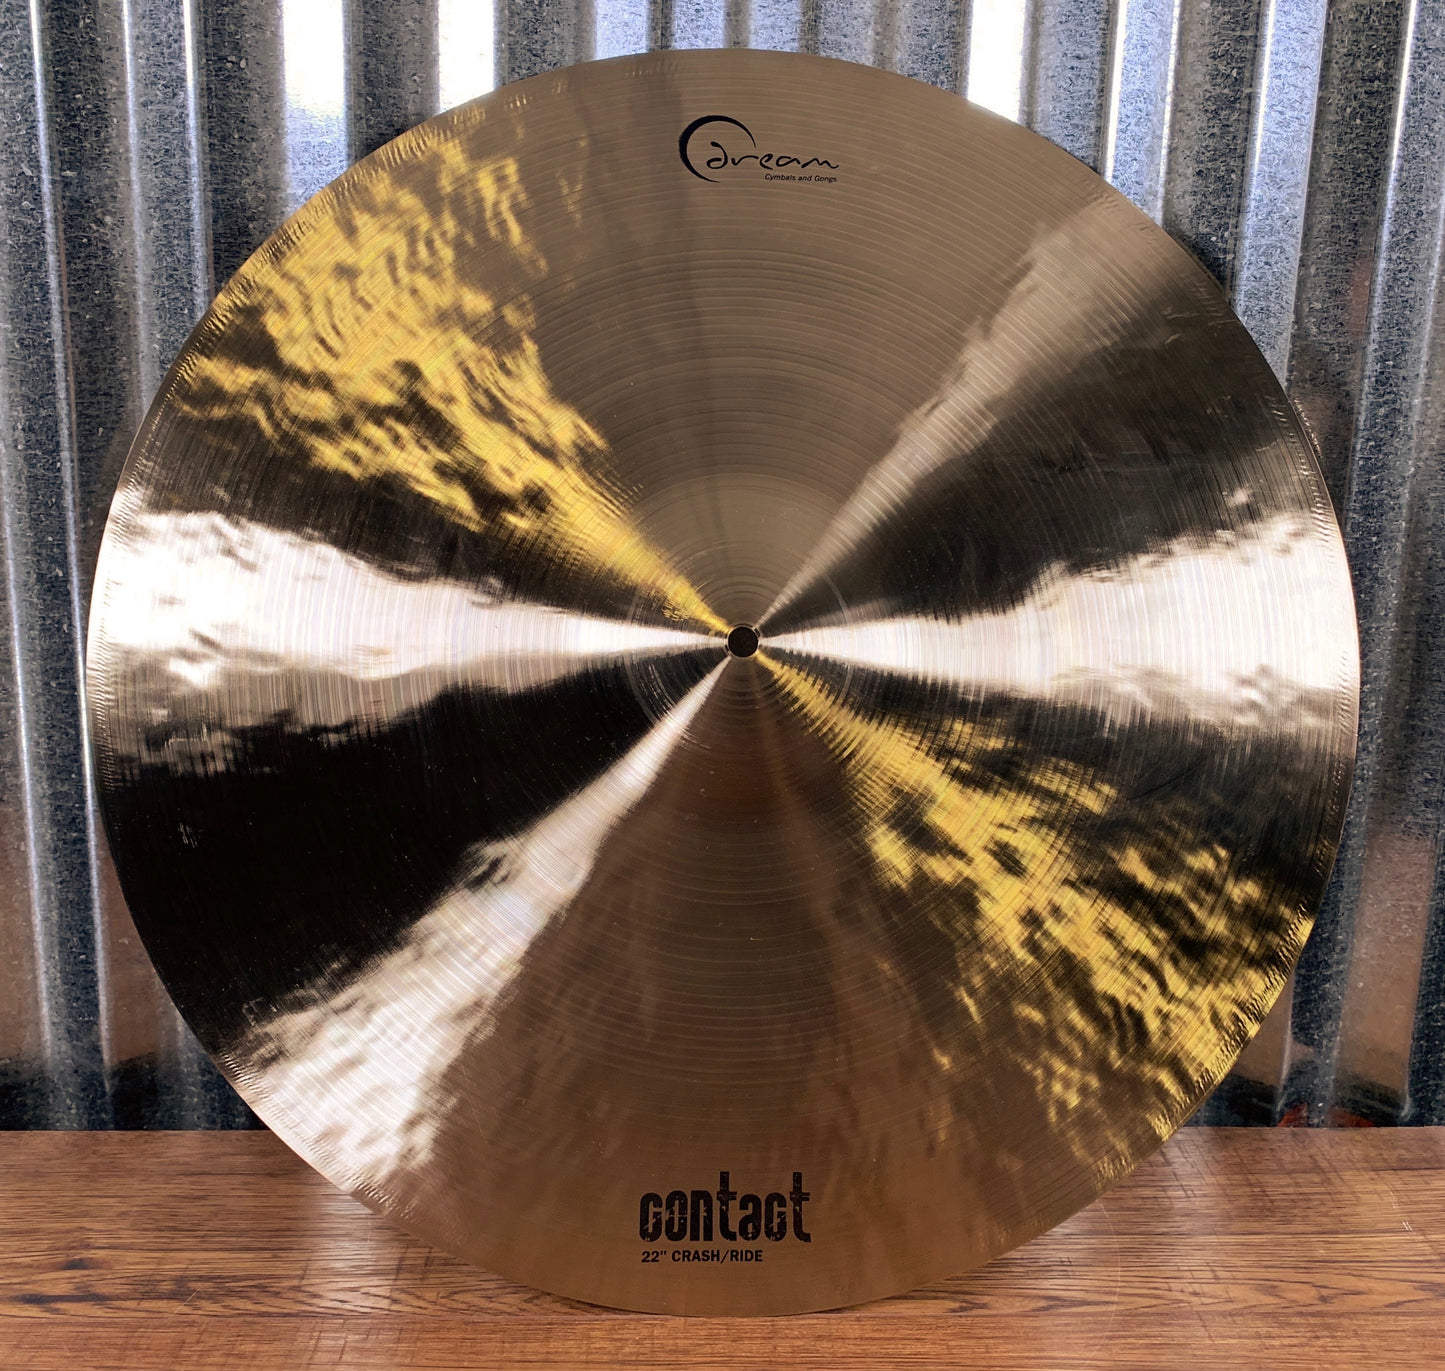 Dream Cymbals C-CRRI22 Contact Series Hand Forged & Hammered 22" Crash Ride